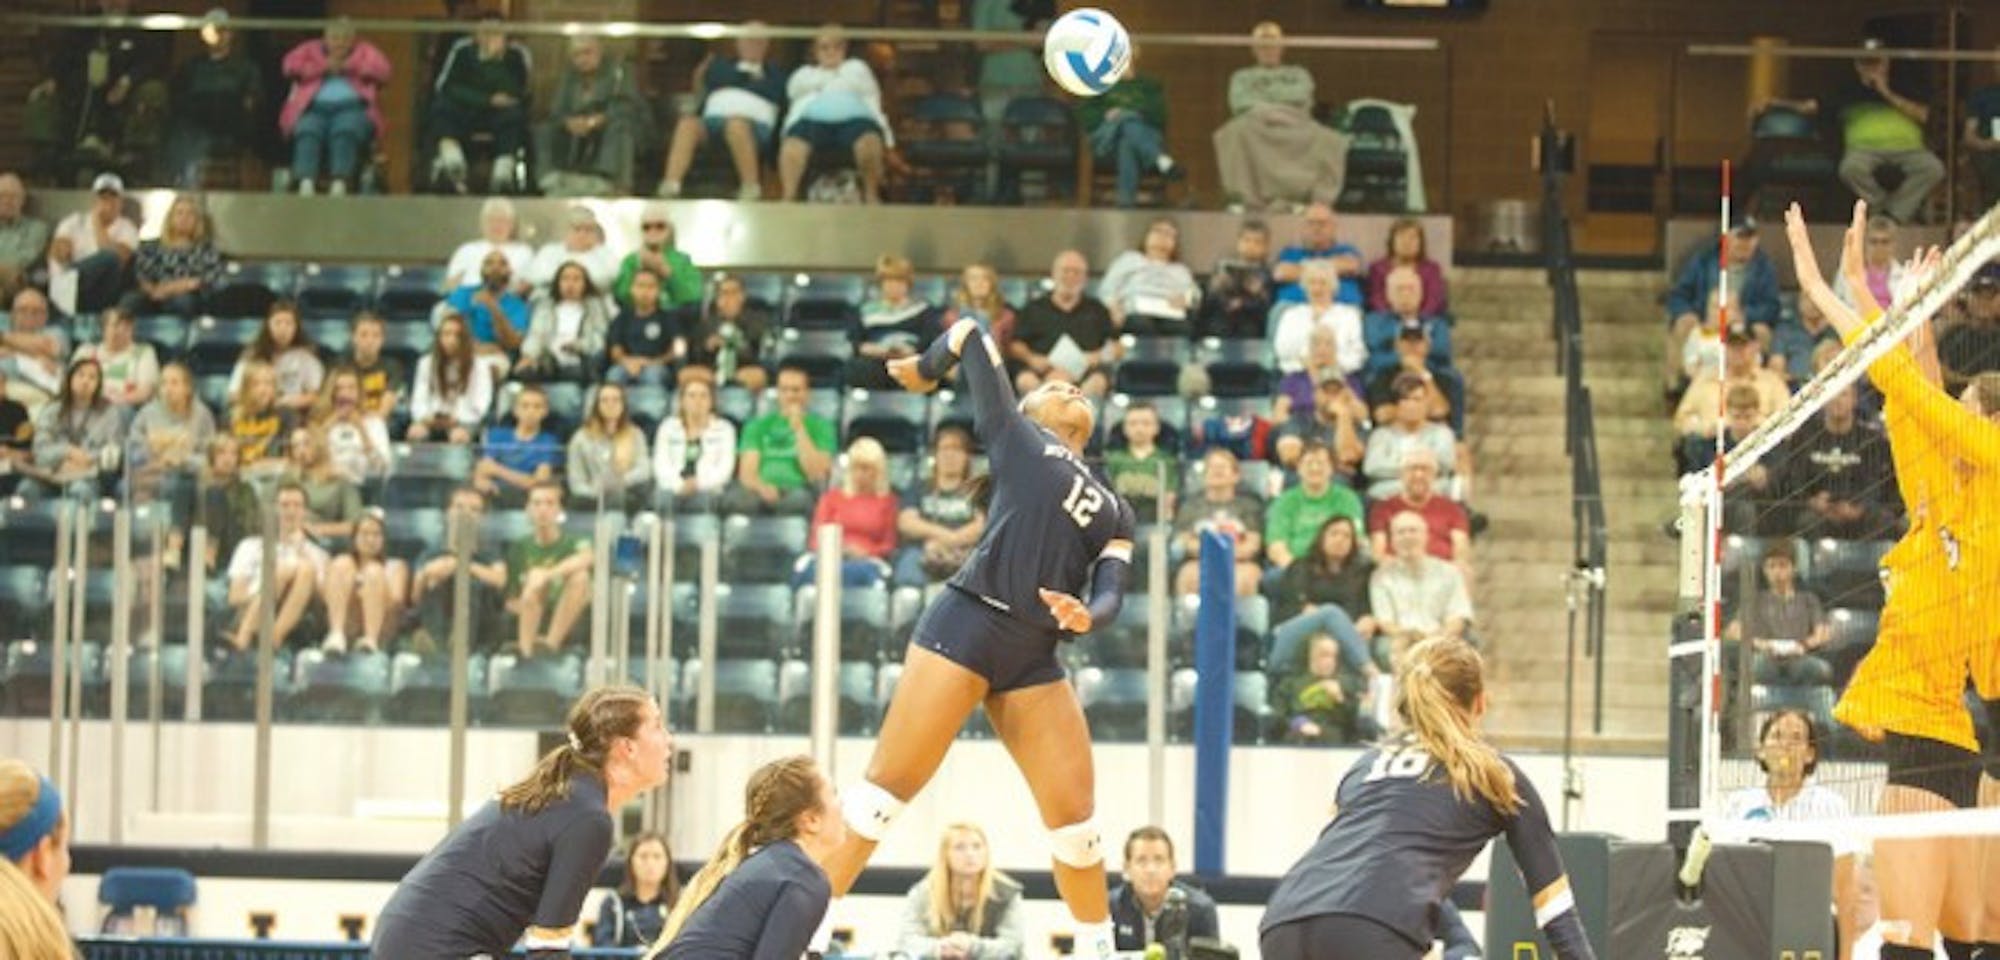 Irish sophomore outside hitter Jemma Yeadon attacks the ball during Notre Dame's 3-1 win over Valparaiso at Compton Family Ice Arena on Aug. 25.